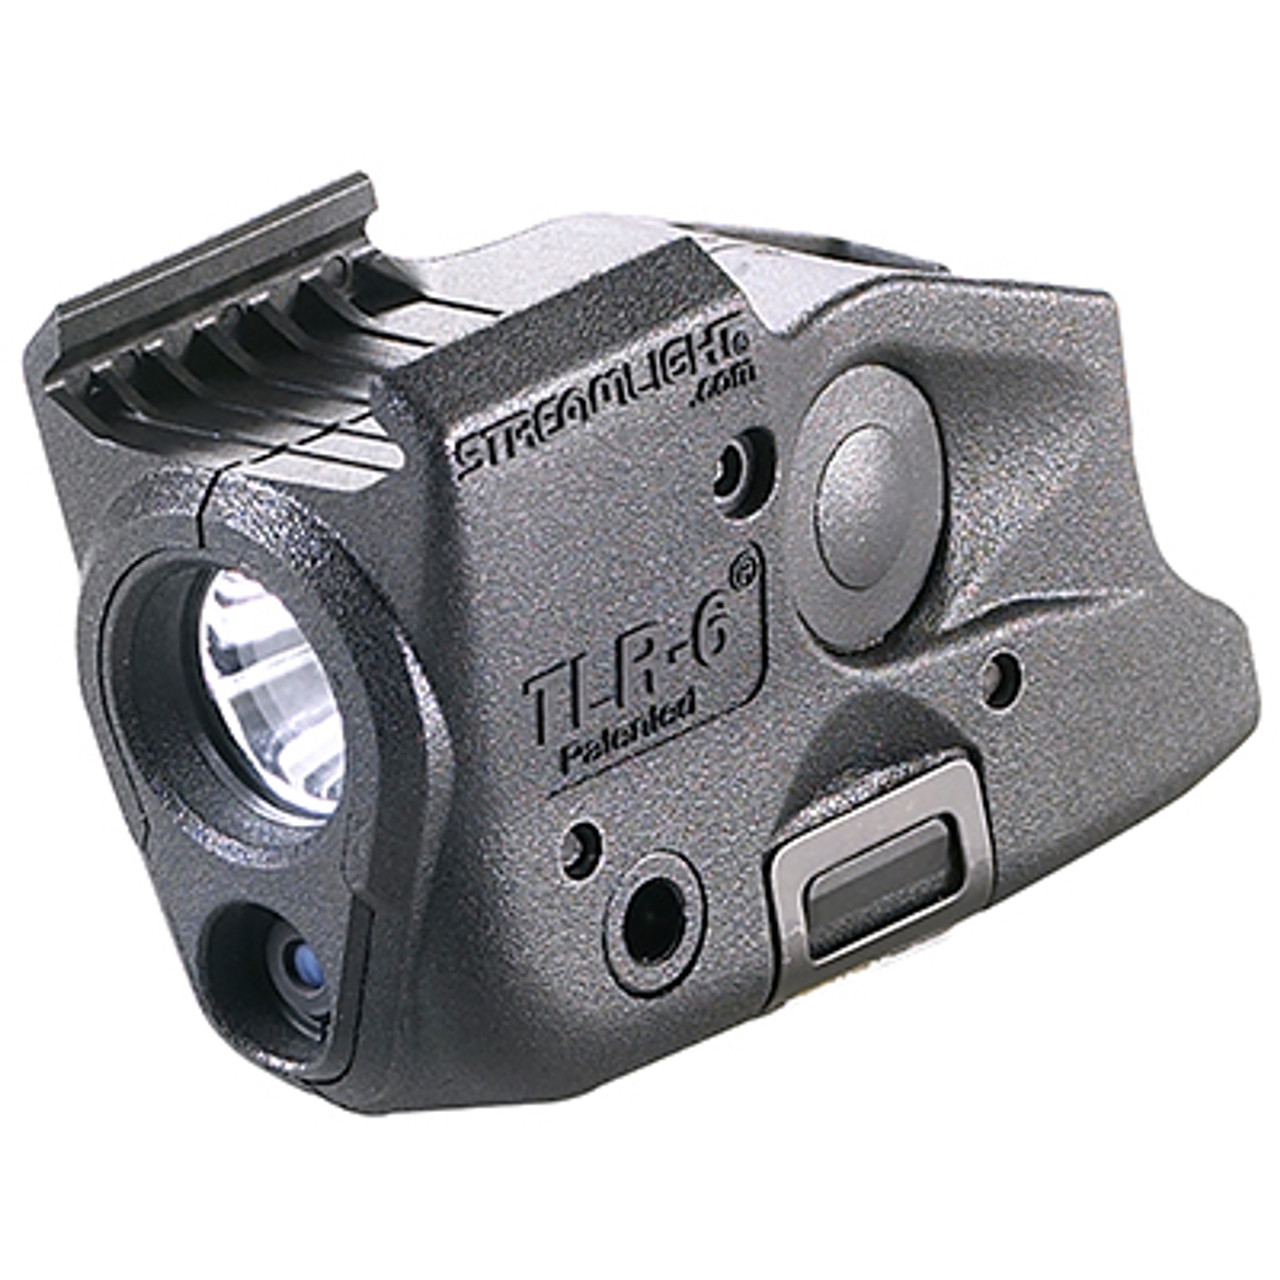 Streamlight 69270 TLR-6 (GLOCK 42/43) with white LED and red laser. Includes two CR 1/3N lithium batteries - DSS